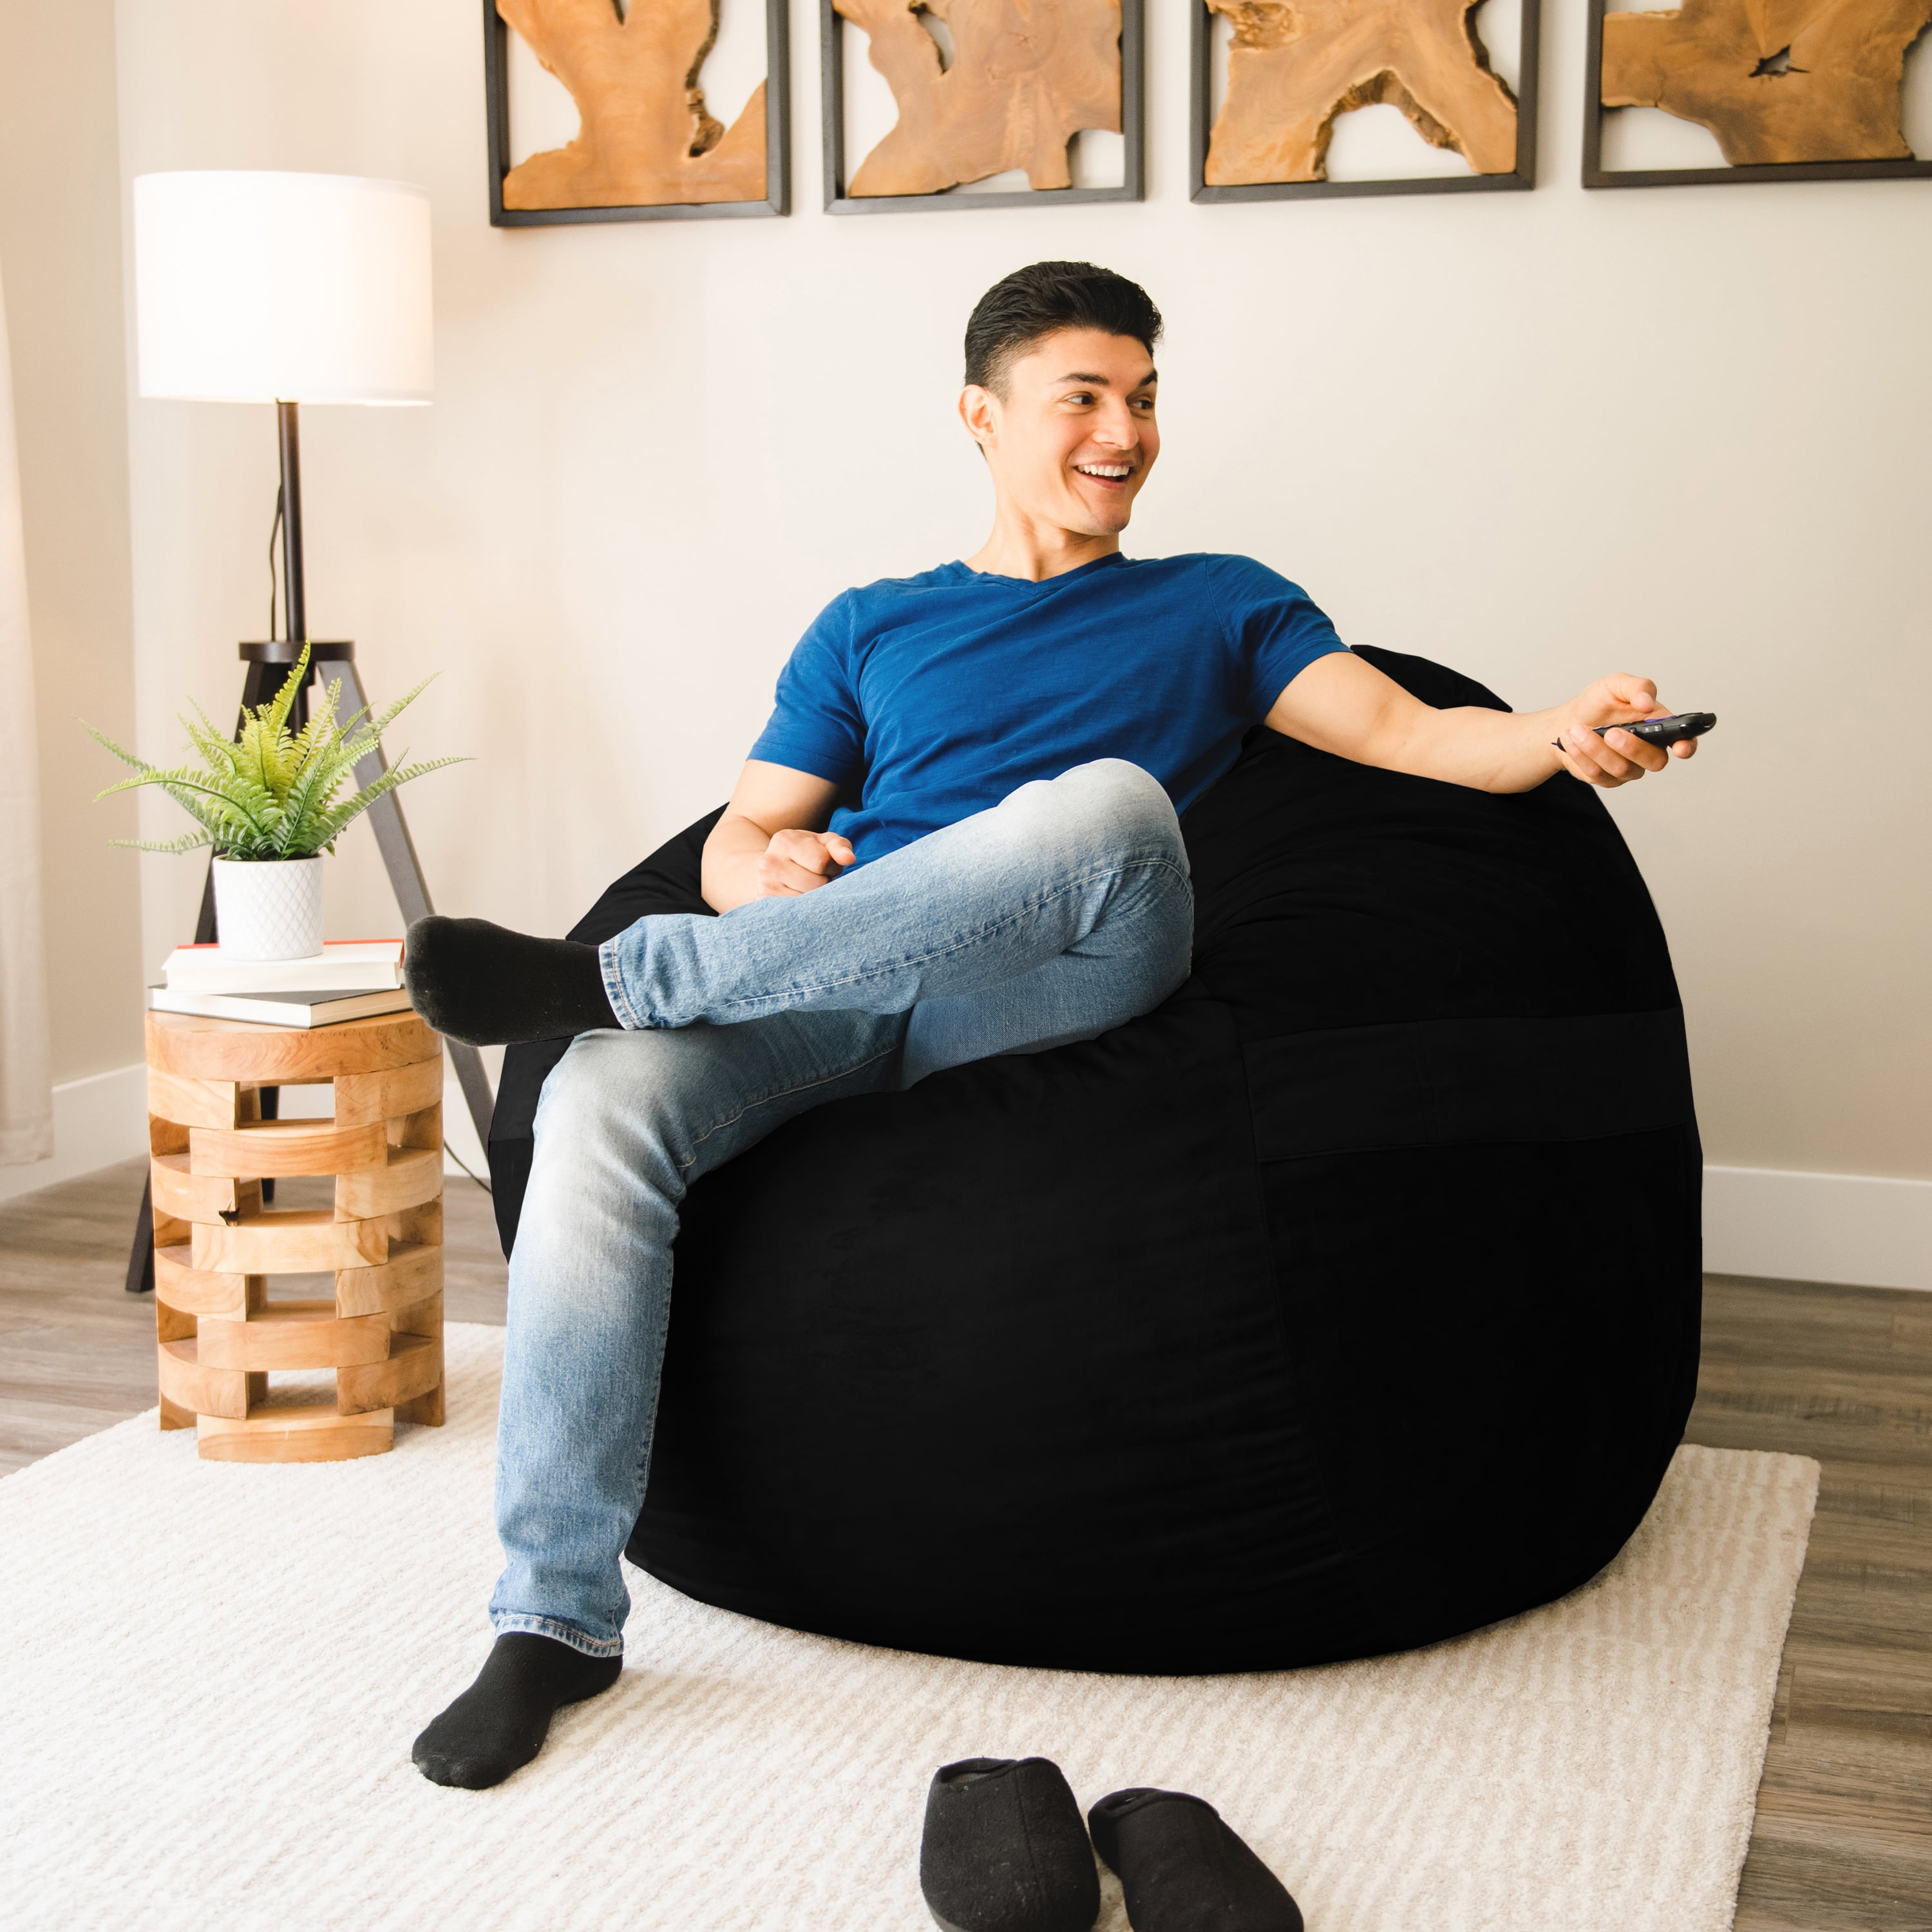 Walmart Is Selling a 7-Foot Bean Bag Chair, So Do Not Disturb Until Further  Notice